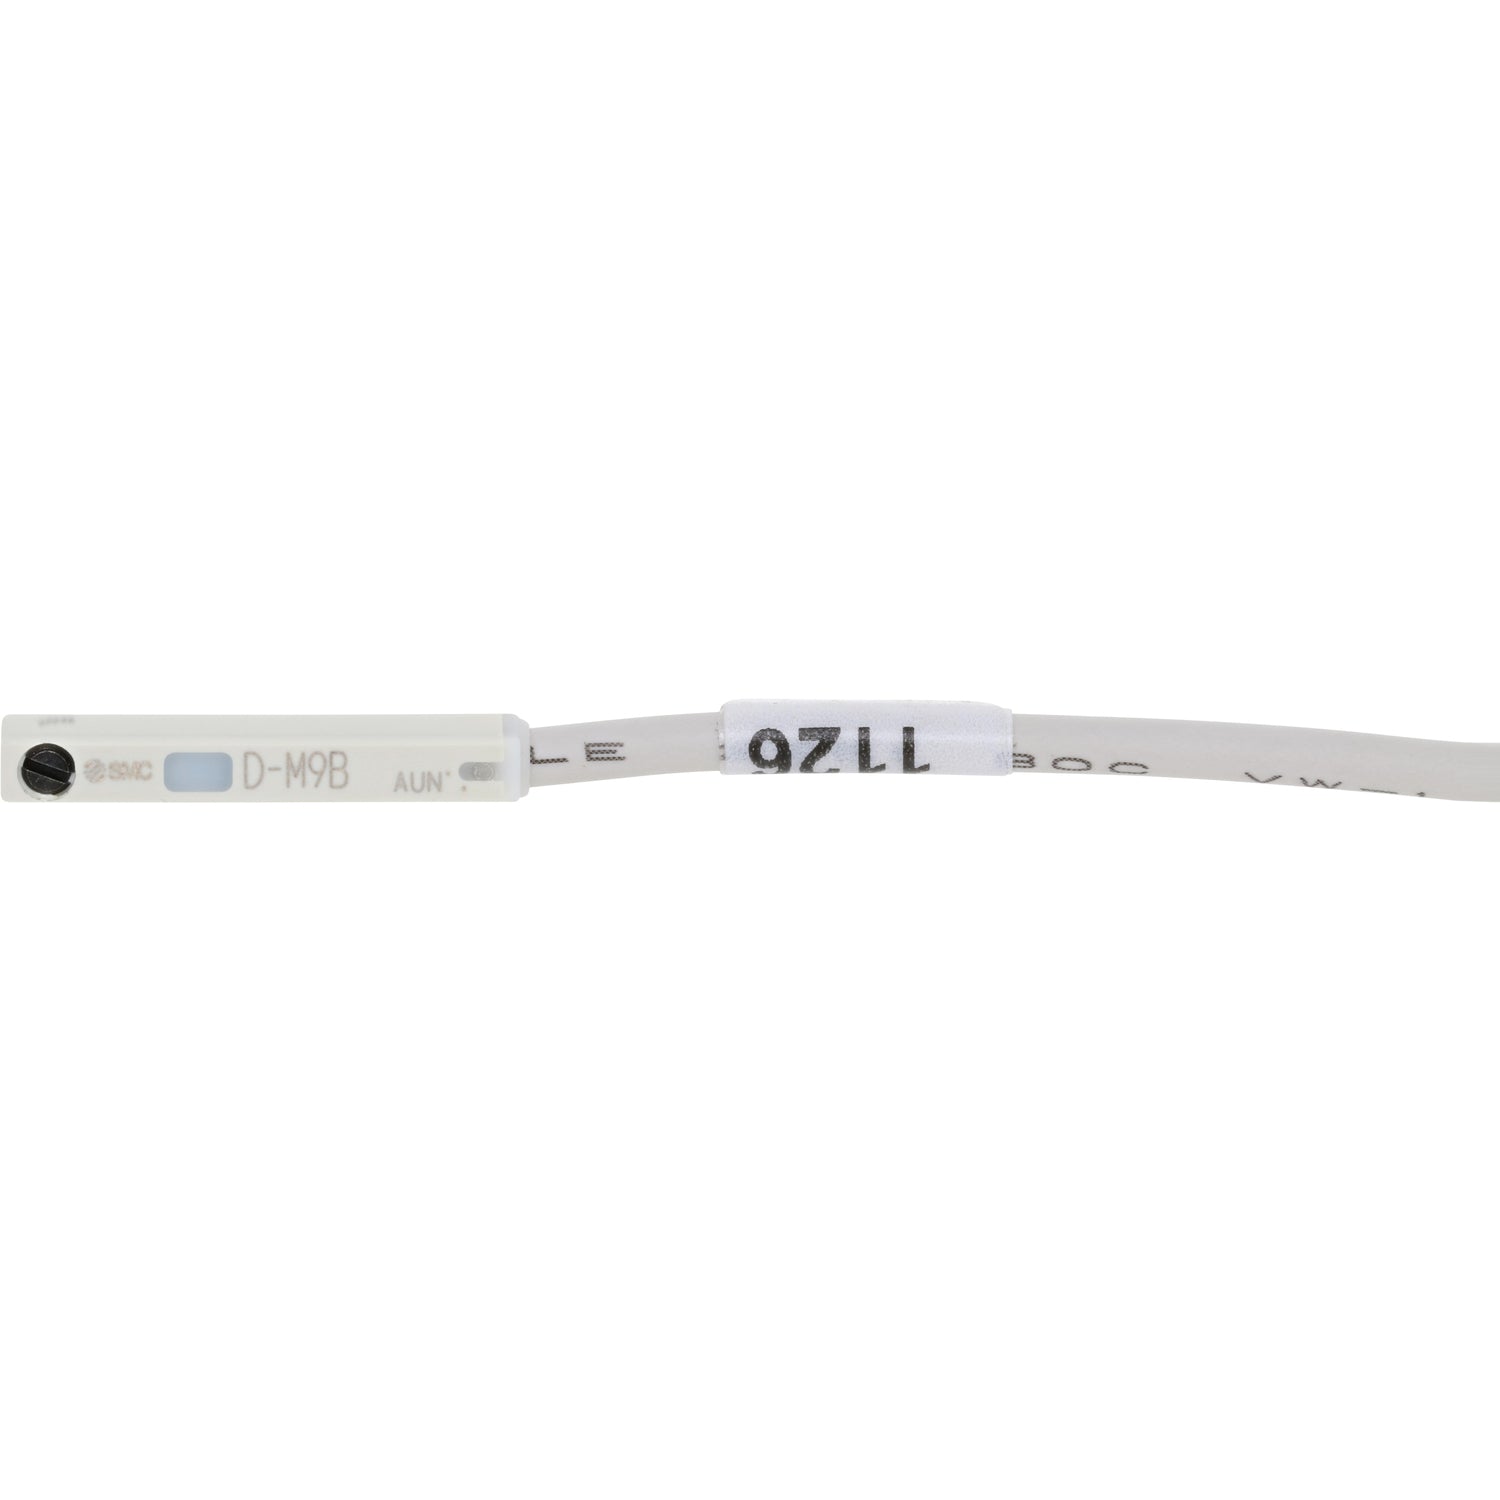 Grey sensor cable with a rectangular off white sensor on the end. Shown on white background.